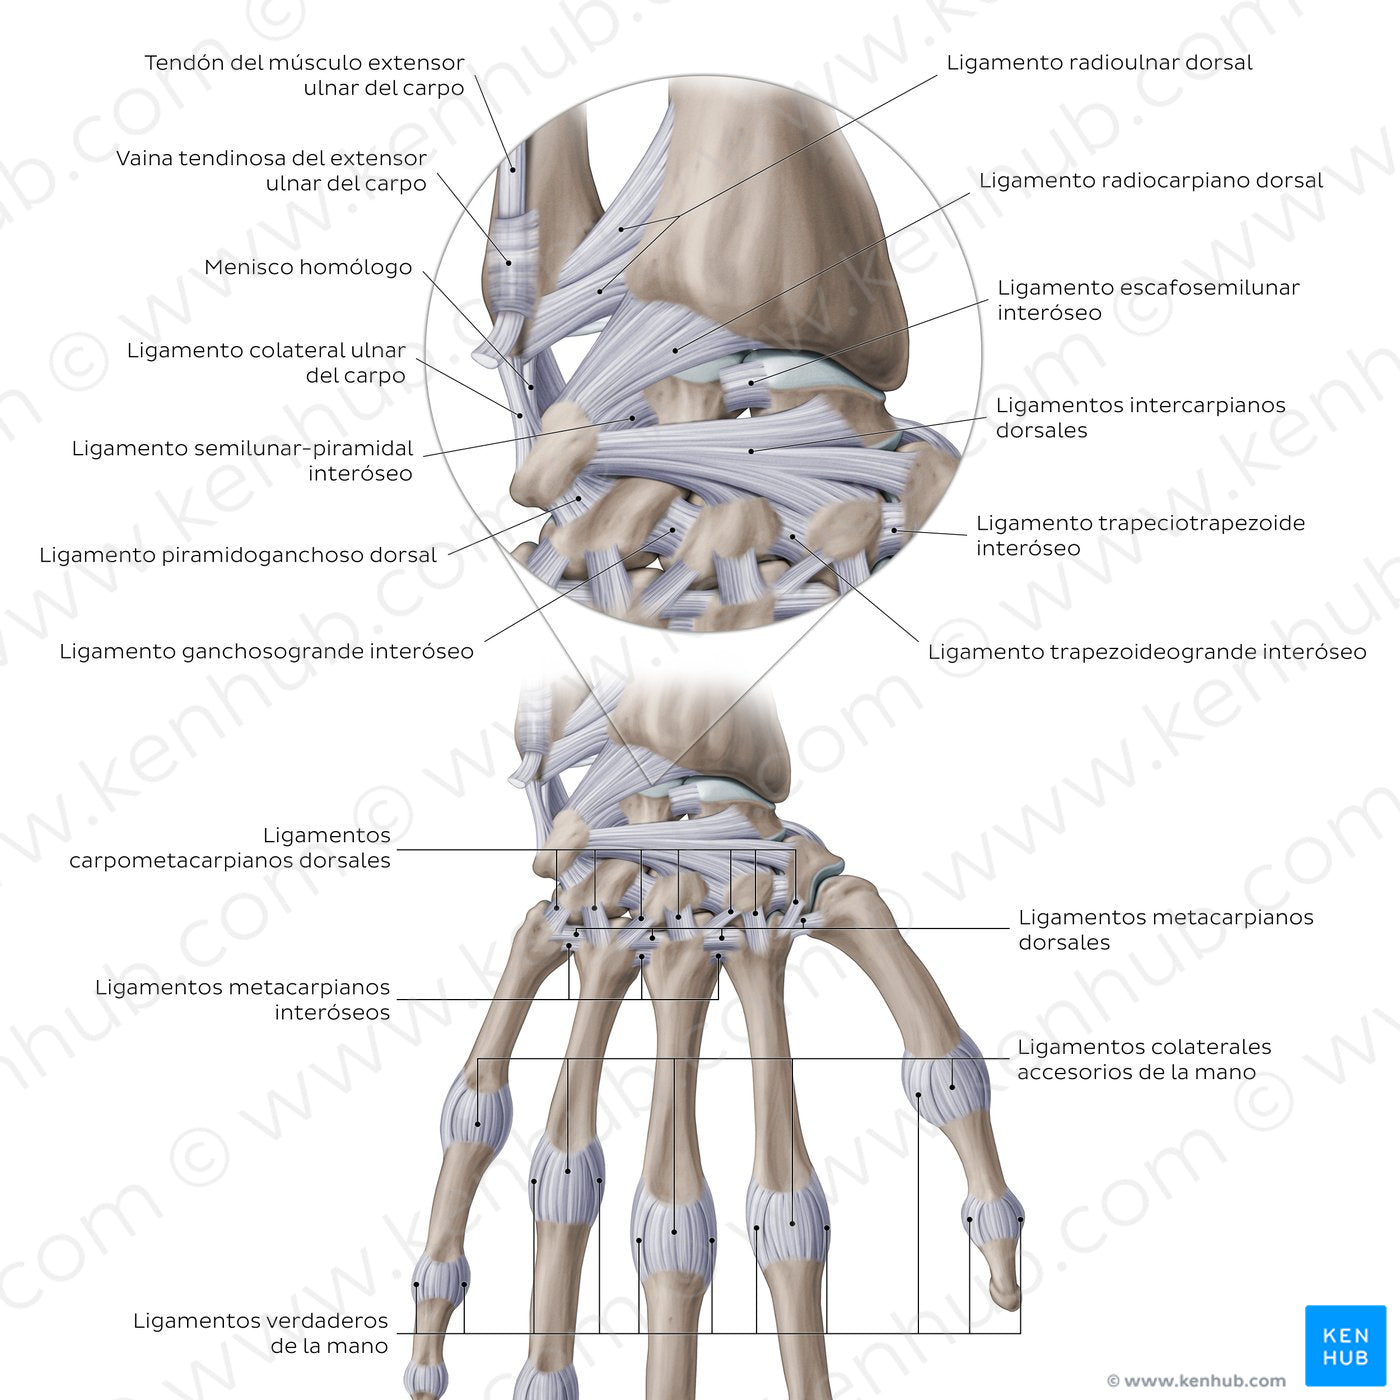 Ligaments of the wrist and hand: Dorsal view (Spanish)